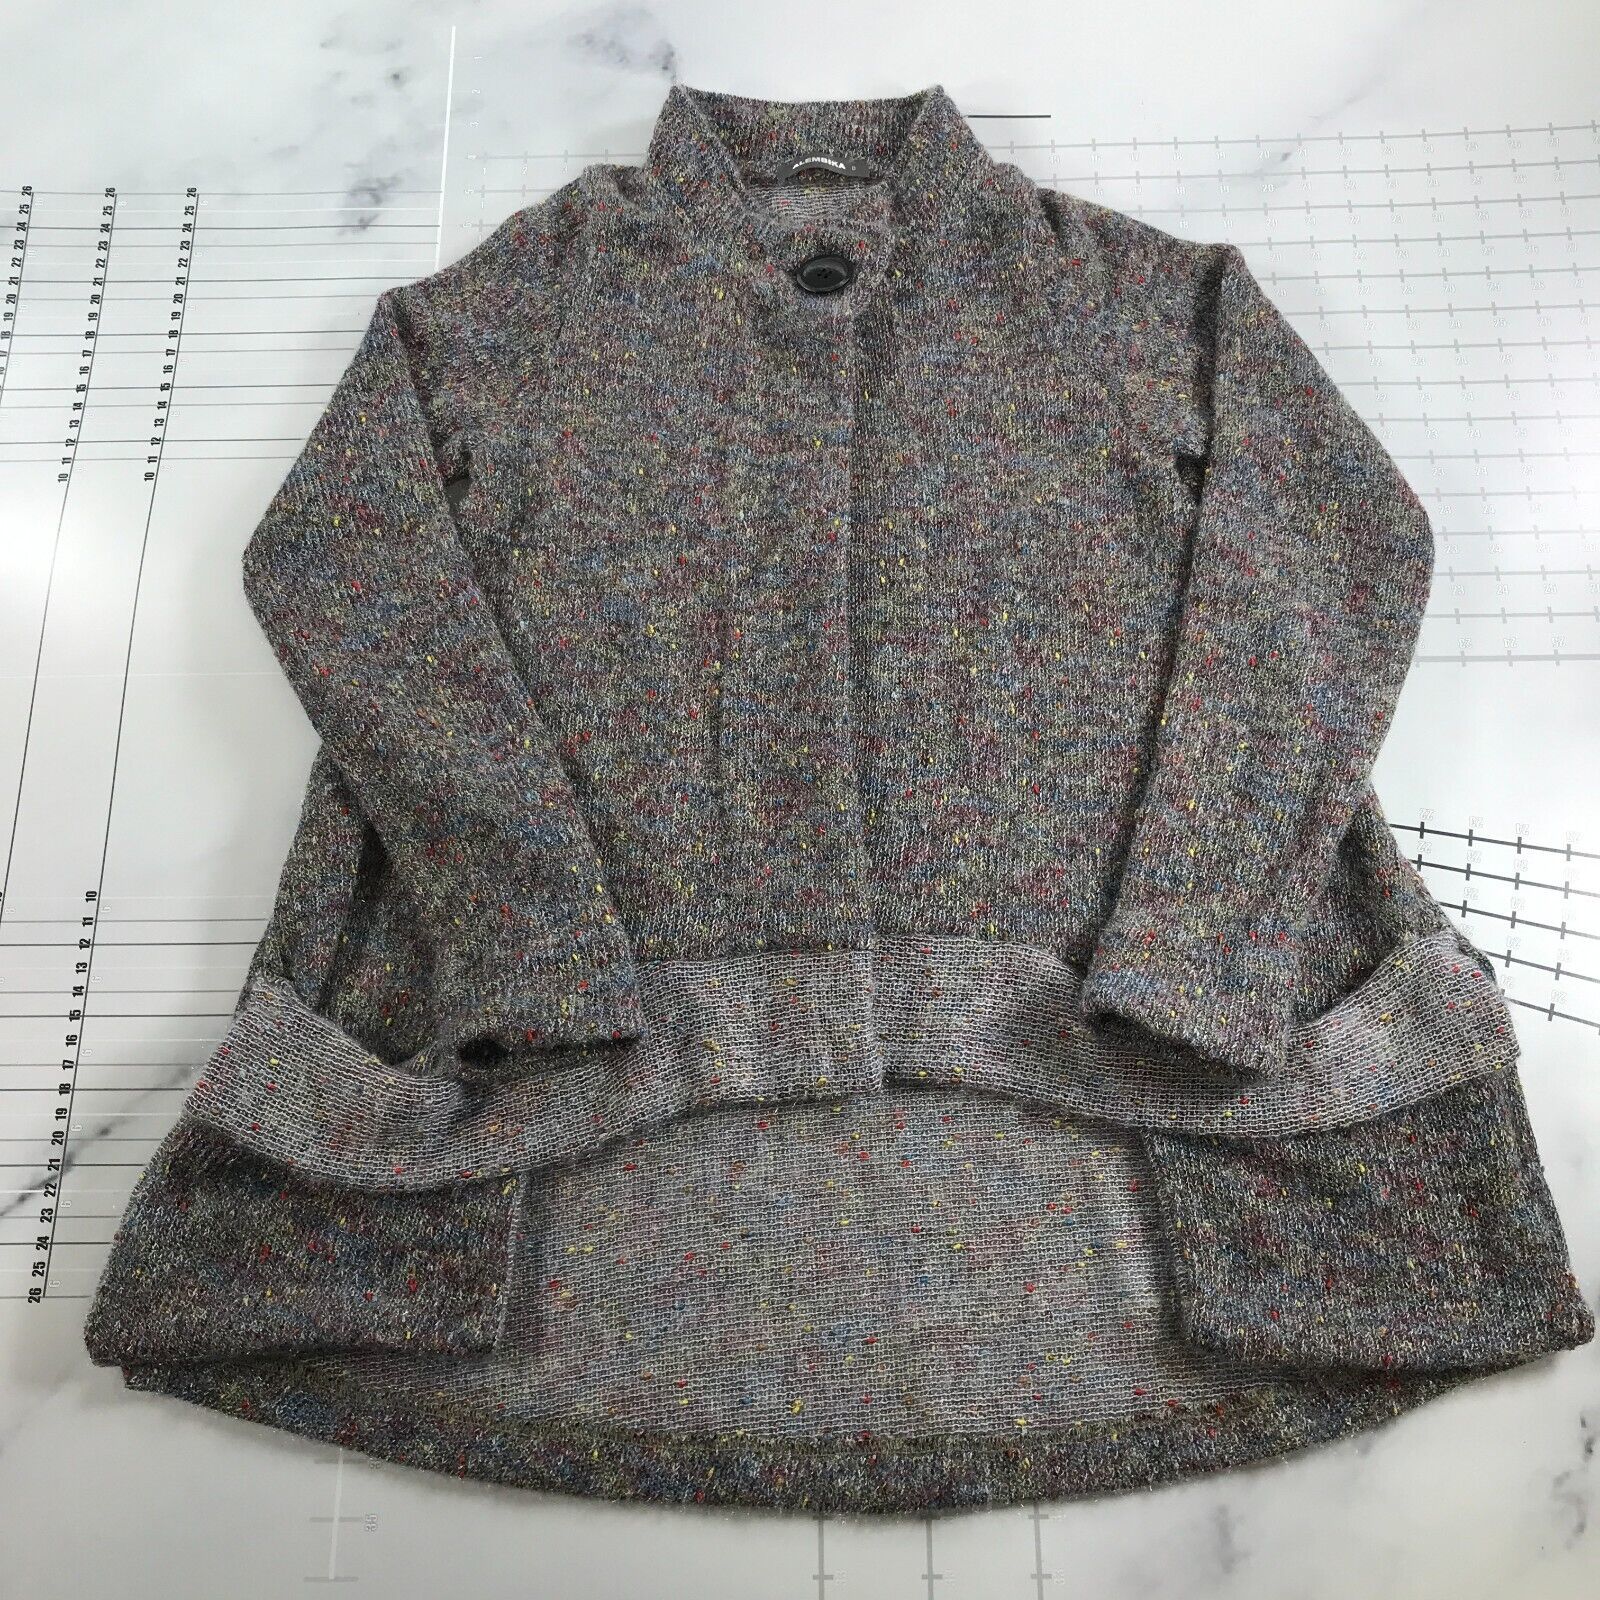 Primary image for Alembika Sweater Dress Womens 0 Gray Purple Red Yellow Blue Speckled Open